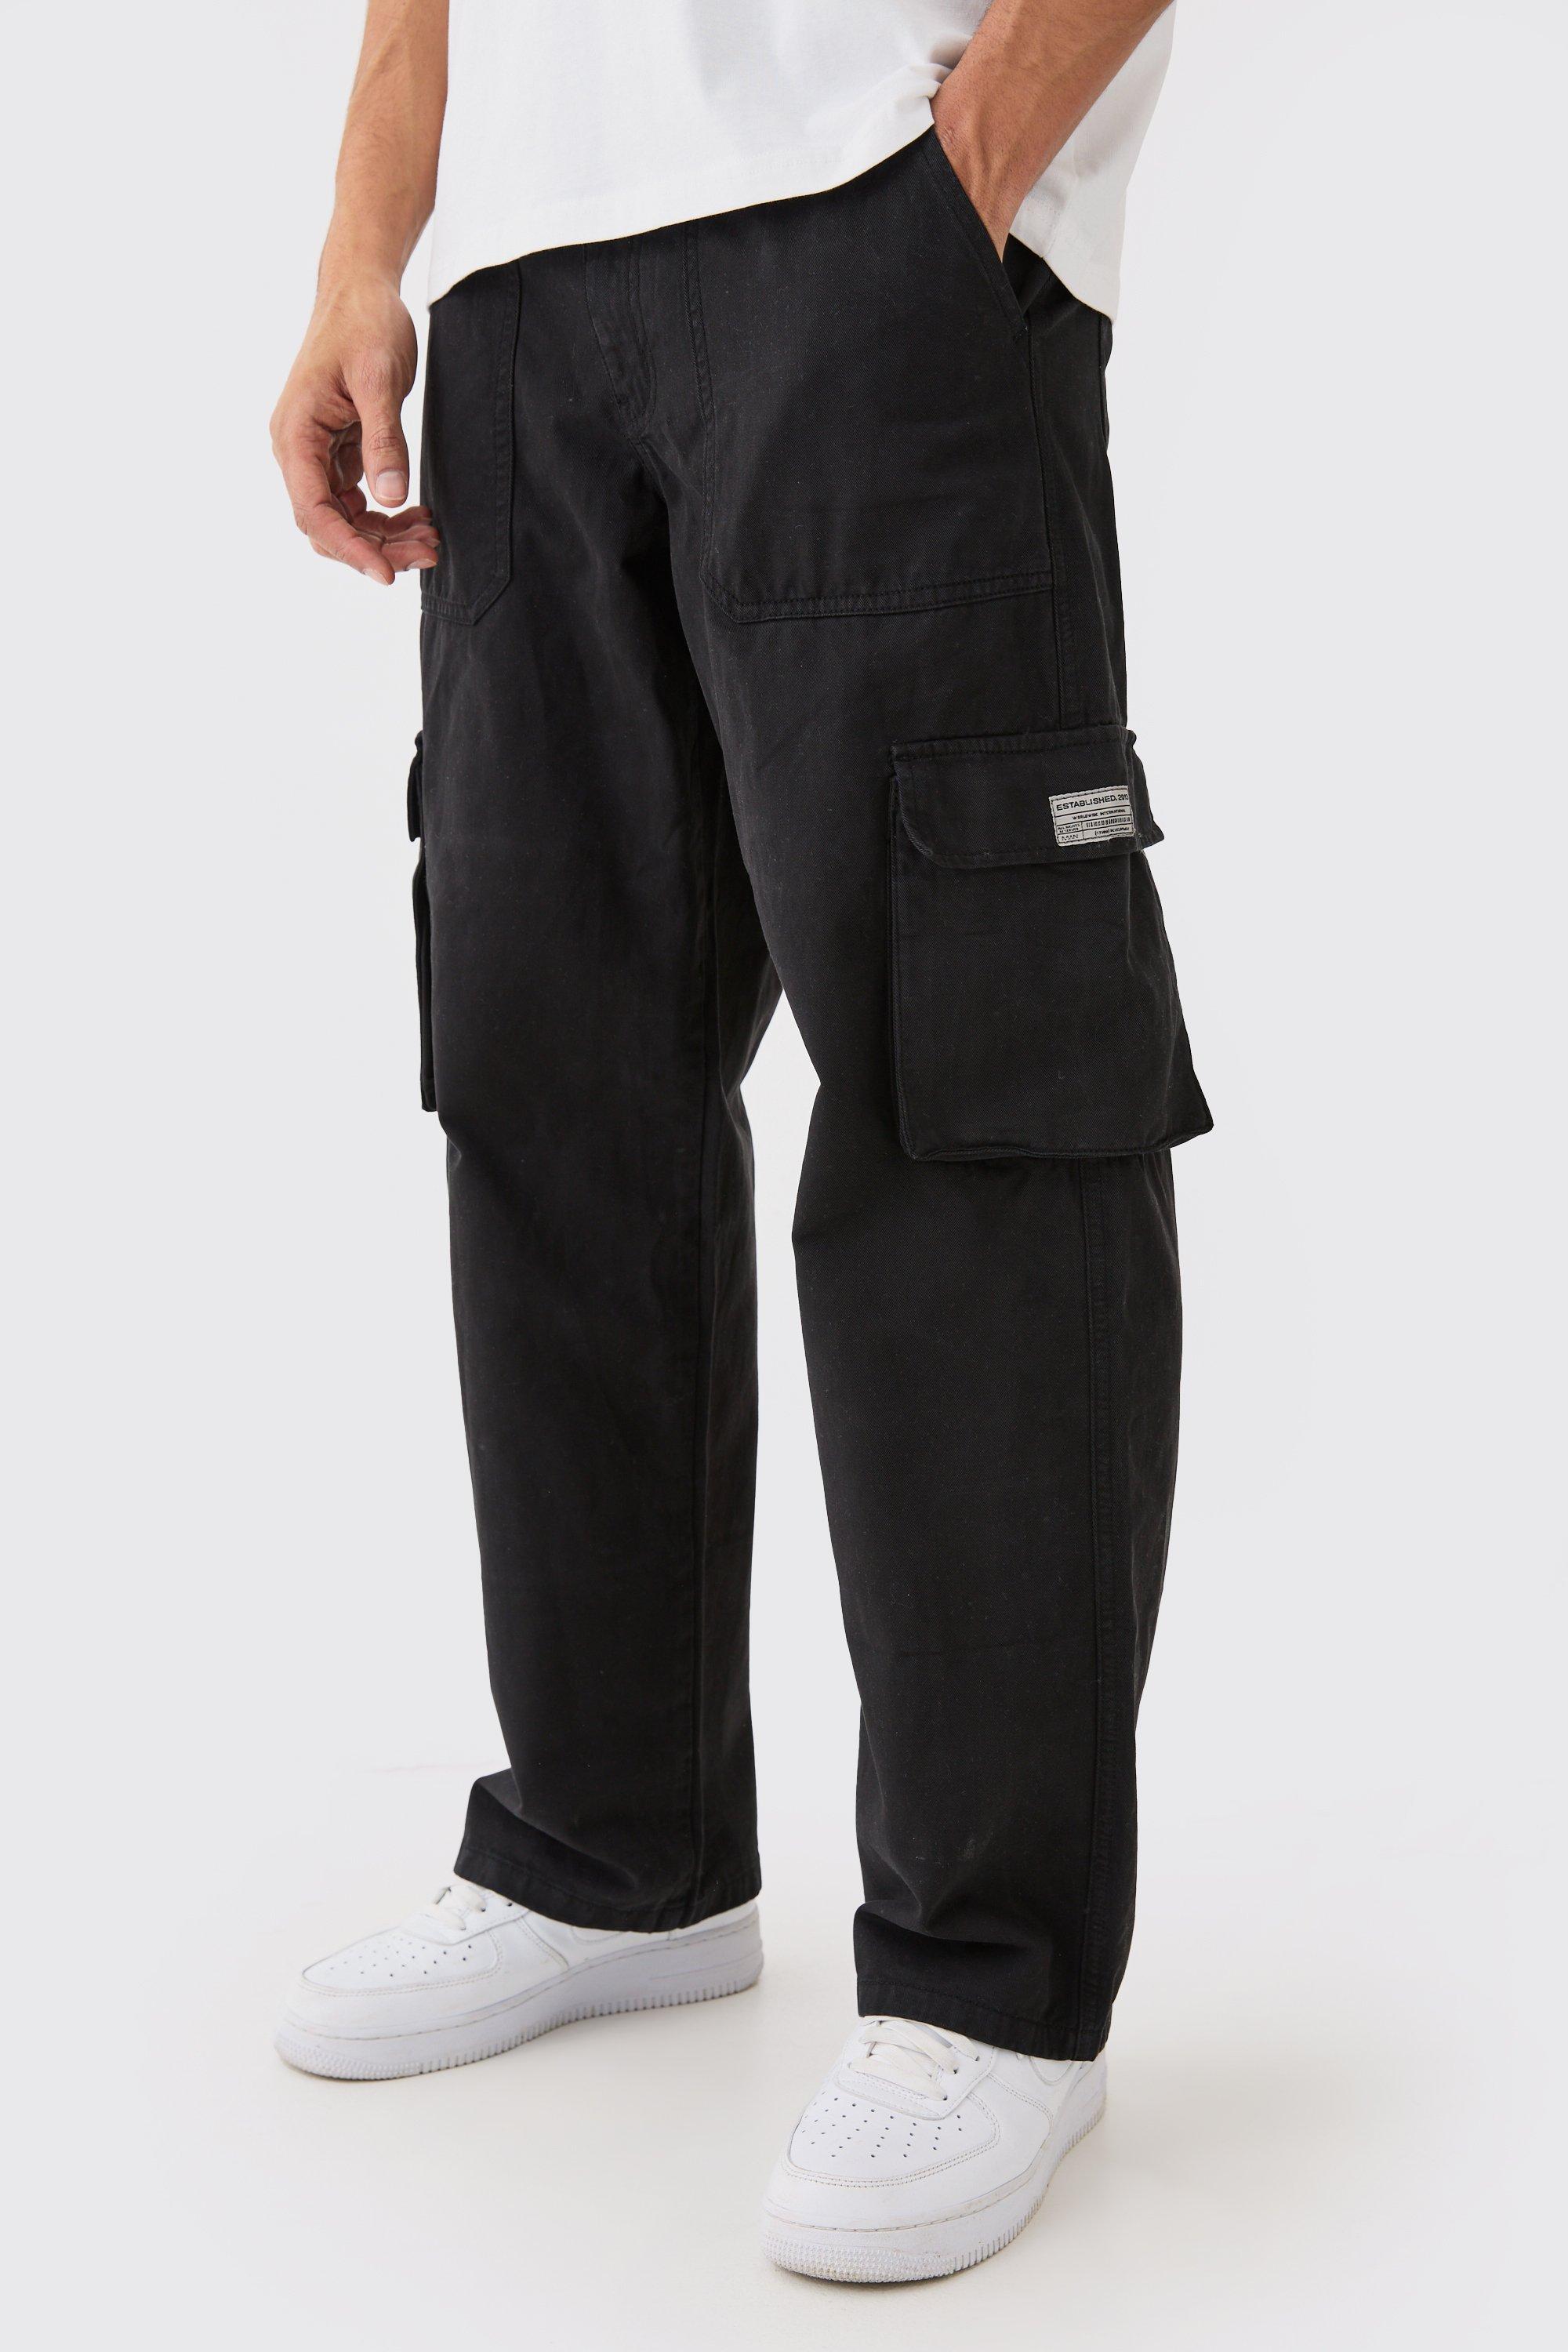 cllios Mens Cargo Pants Big and Tall Multi Pockets Pants Work Tactical  Trousers Casual Jogger Cargo Pants 